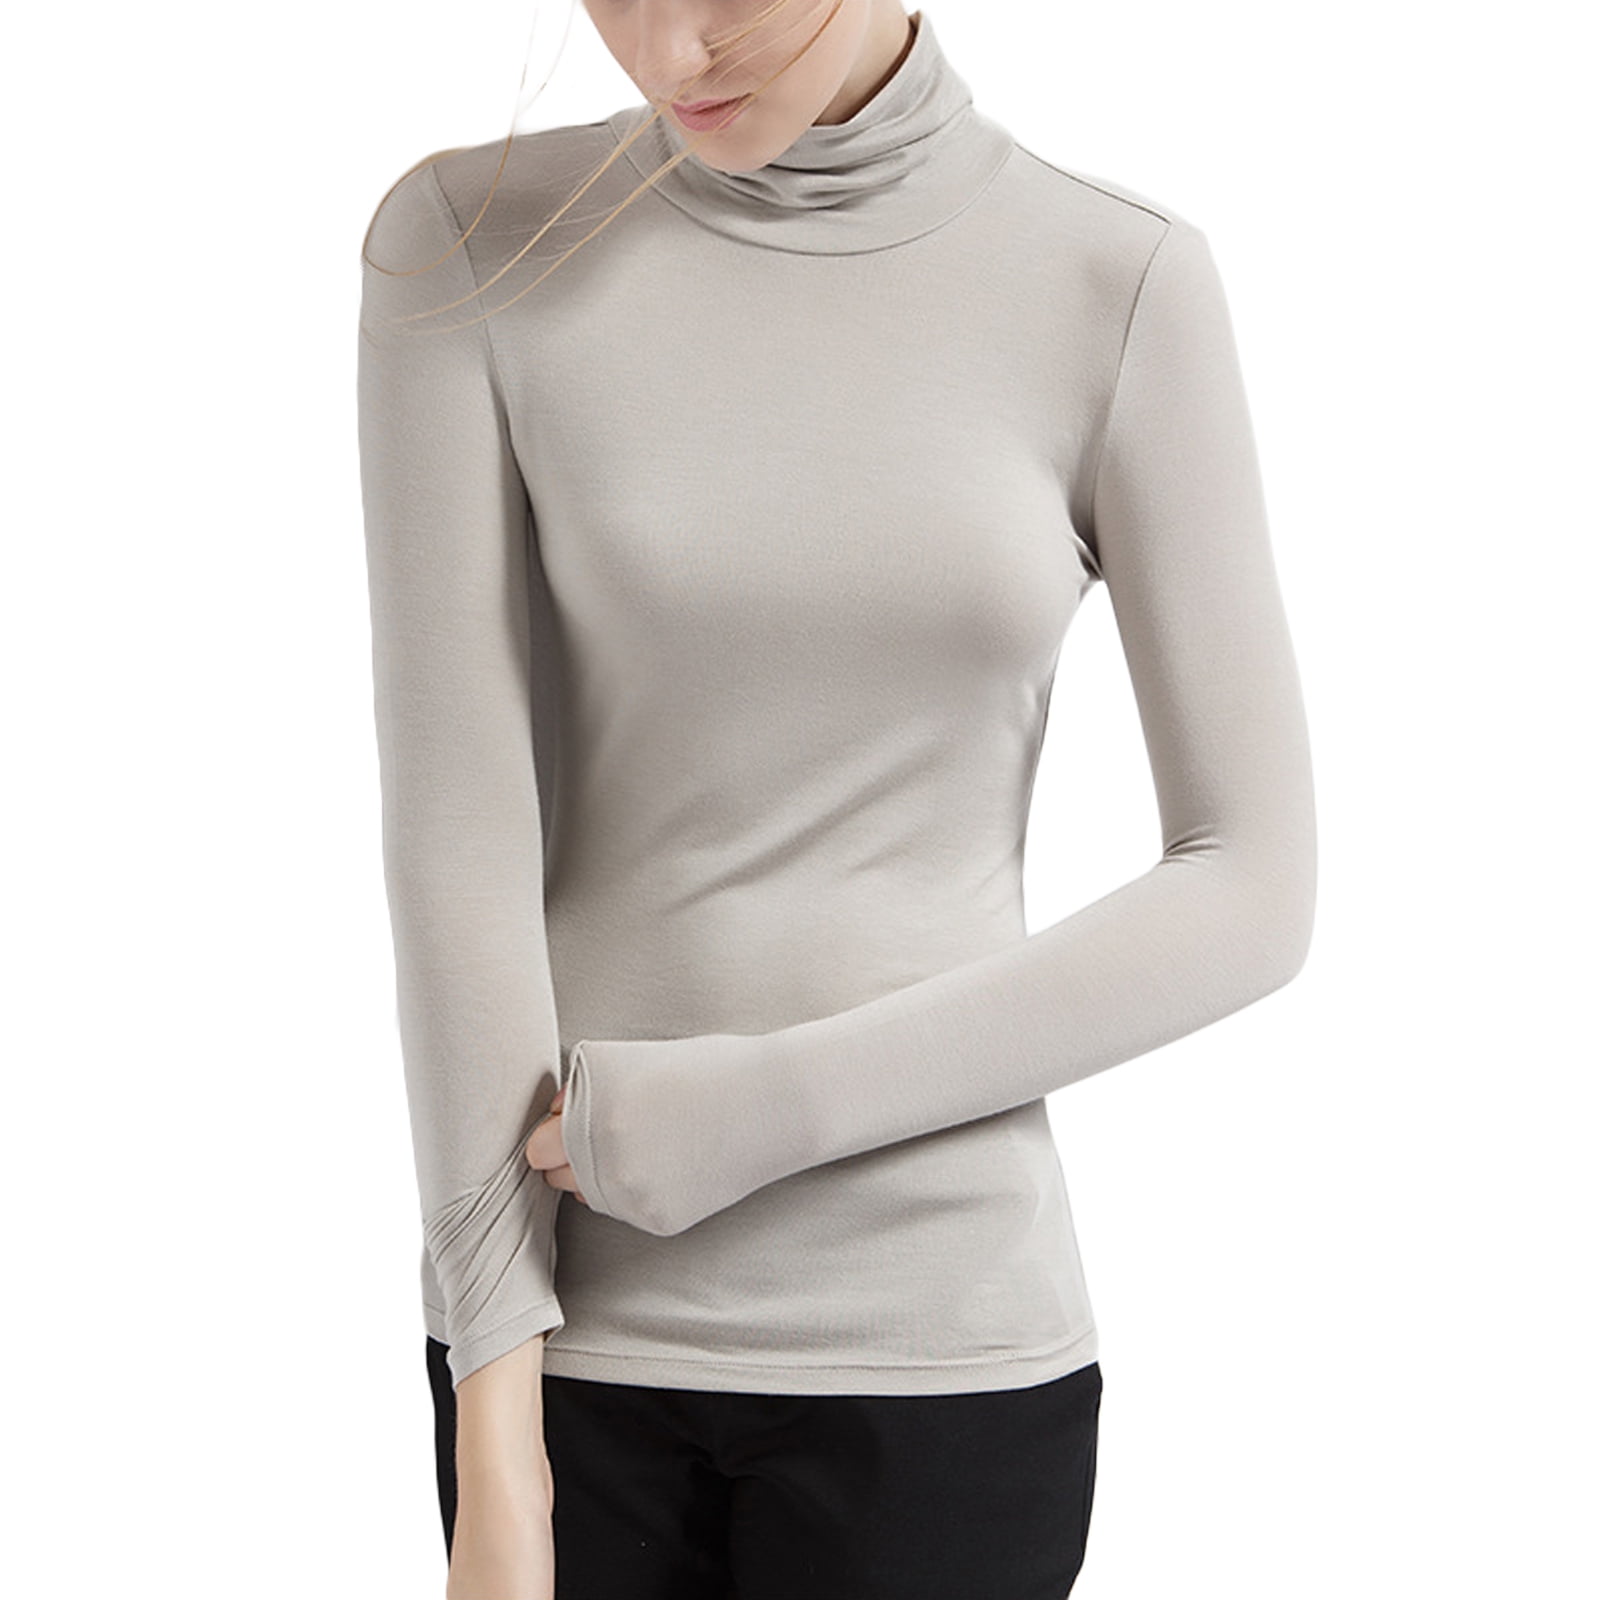 Layer Turtleneck Musuos Women\'s Slim Fitted Pullover, Shirts Soft Tops Base Modal Sleeve Base Long Stretchy